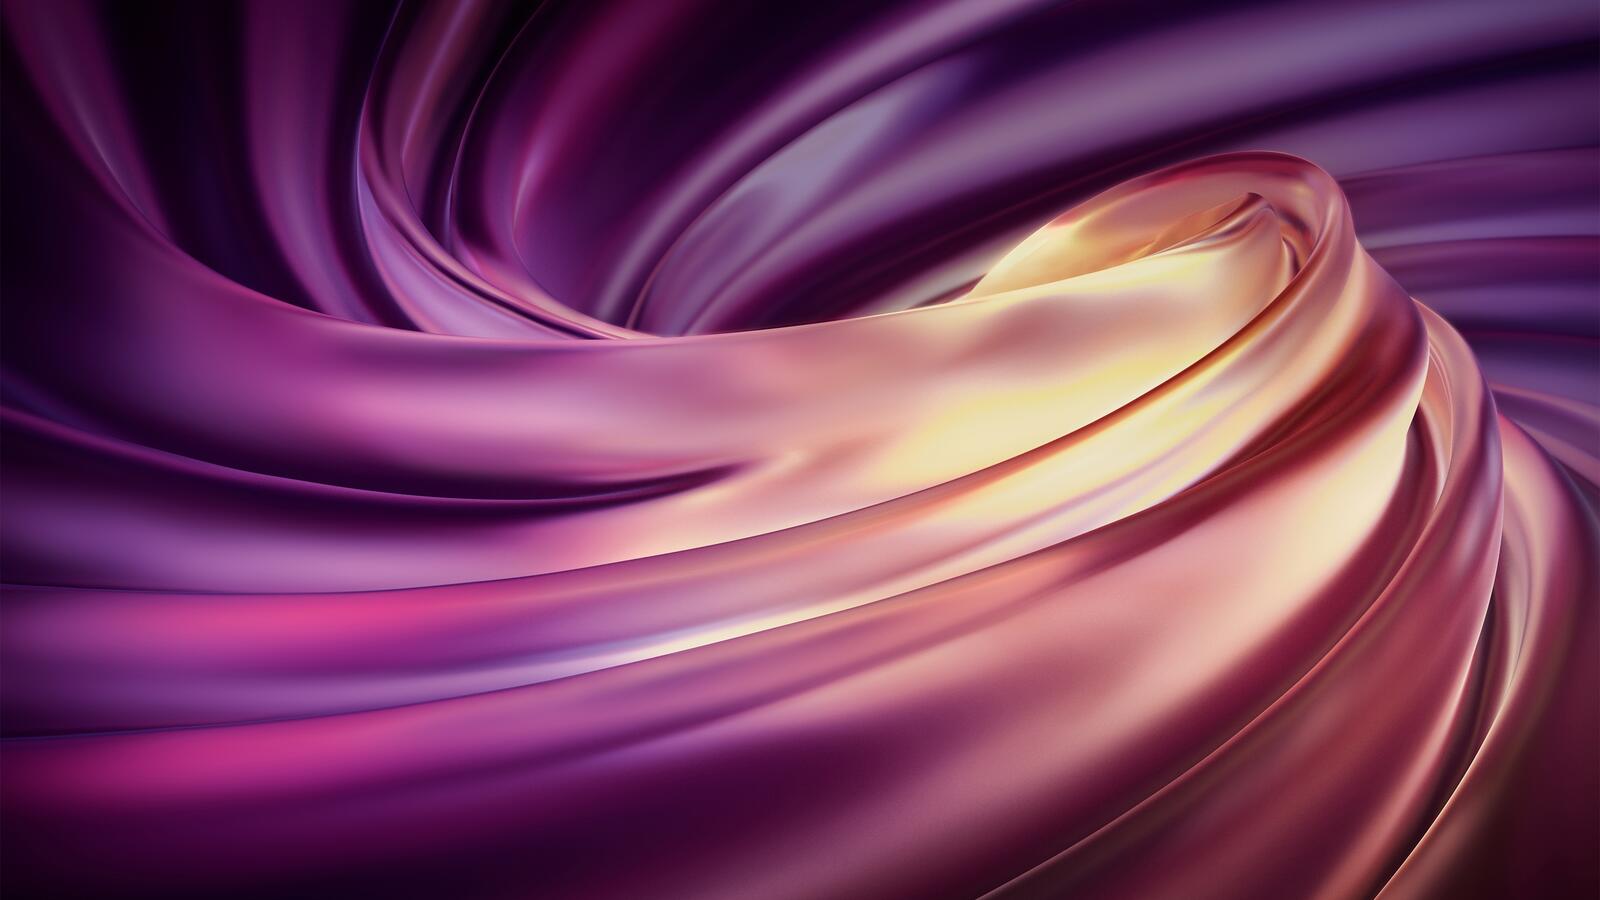 Wallpapers nested wavy twisted on the desktop